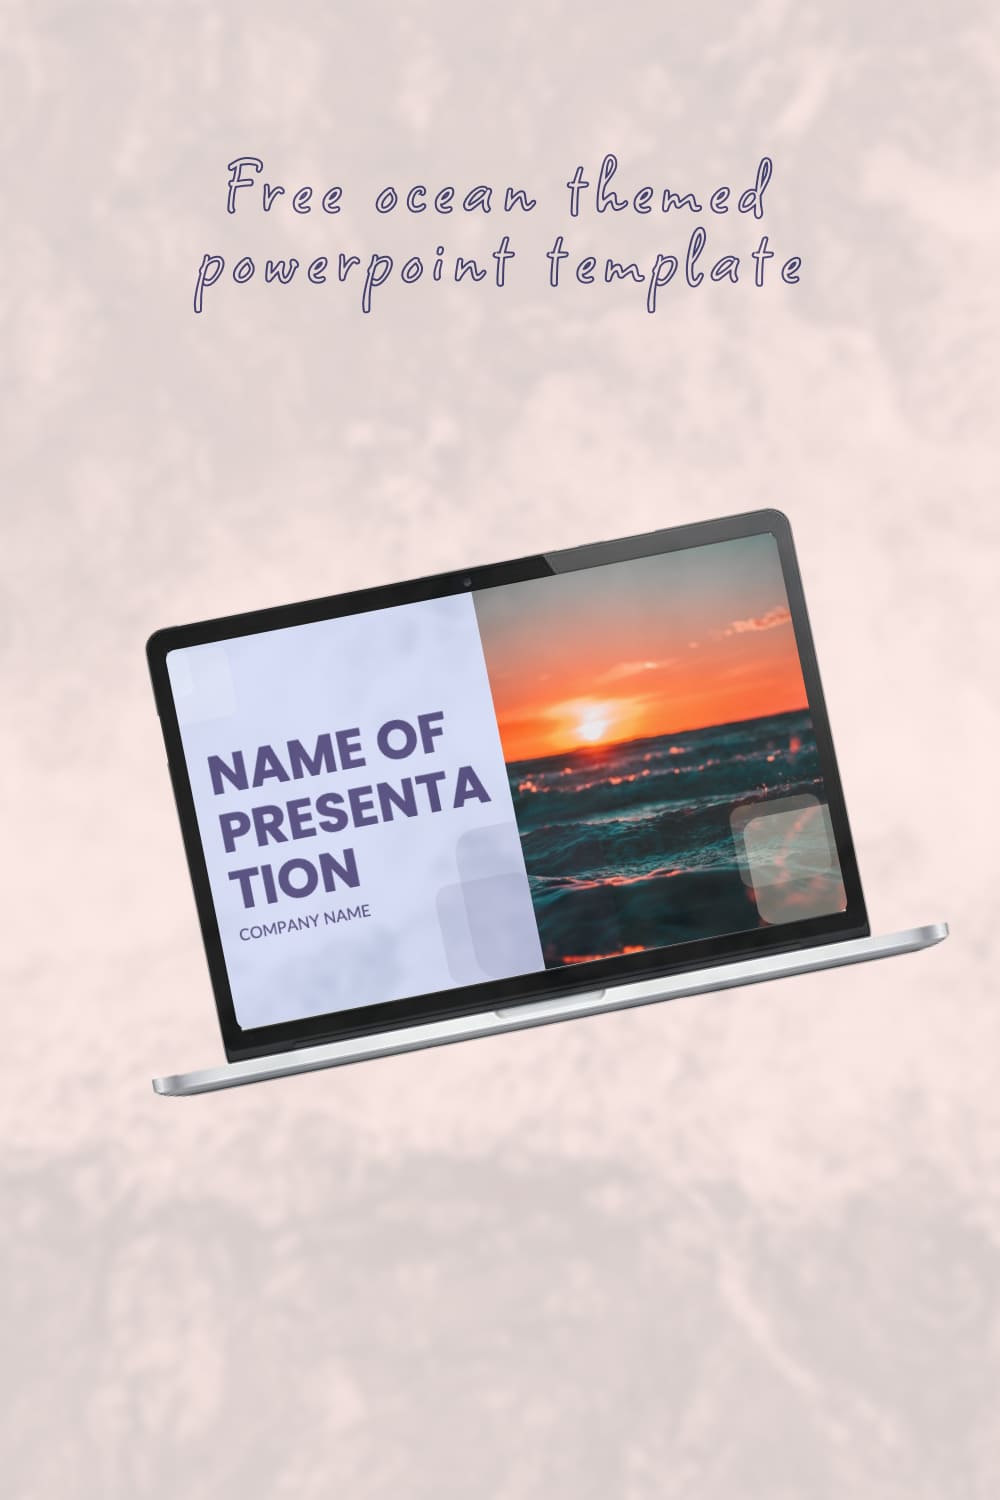 Free powerpoint ocean theme - pinterest image preview.